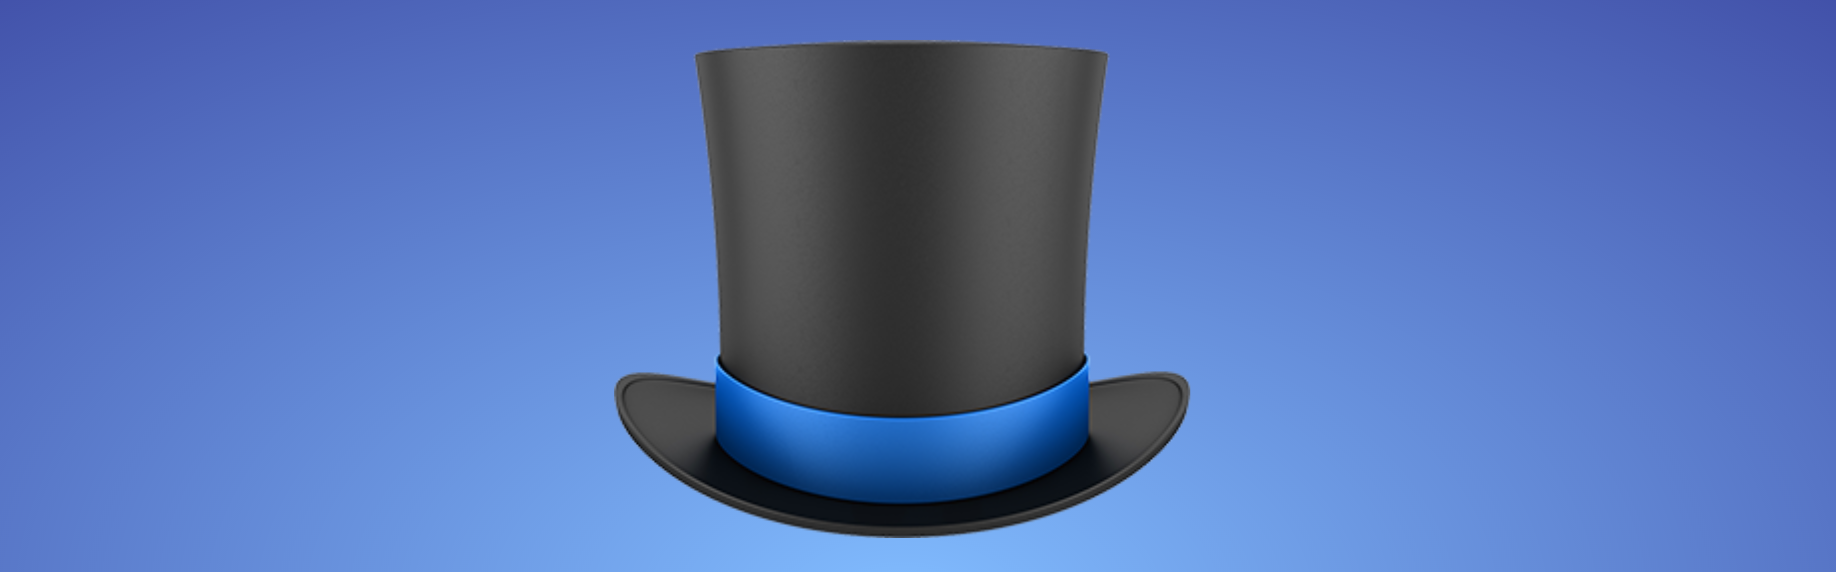 Image of a top hat